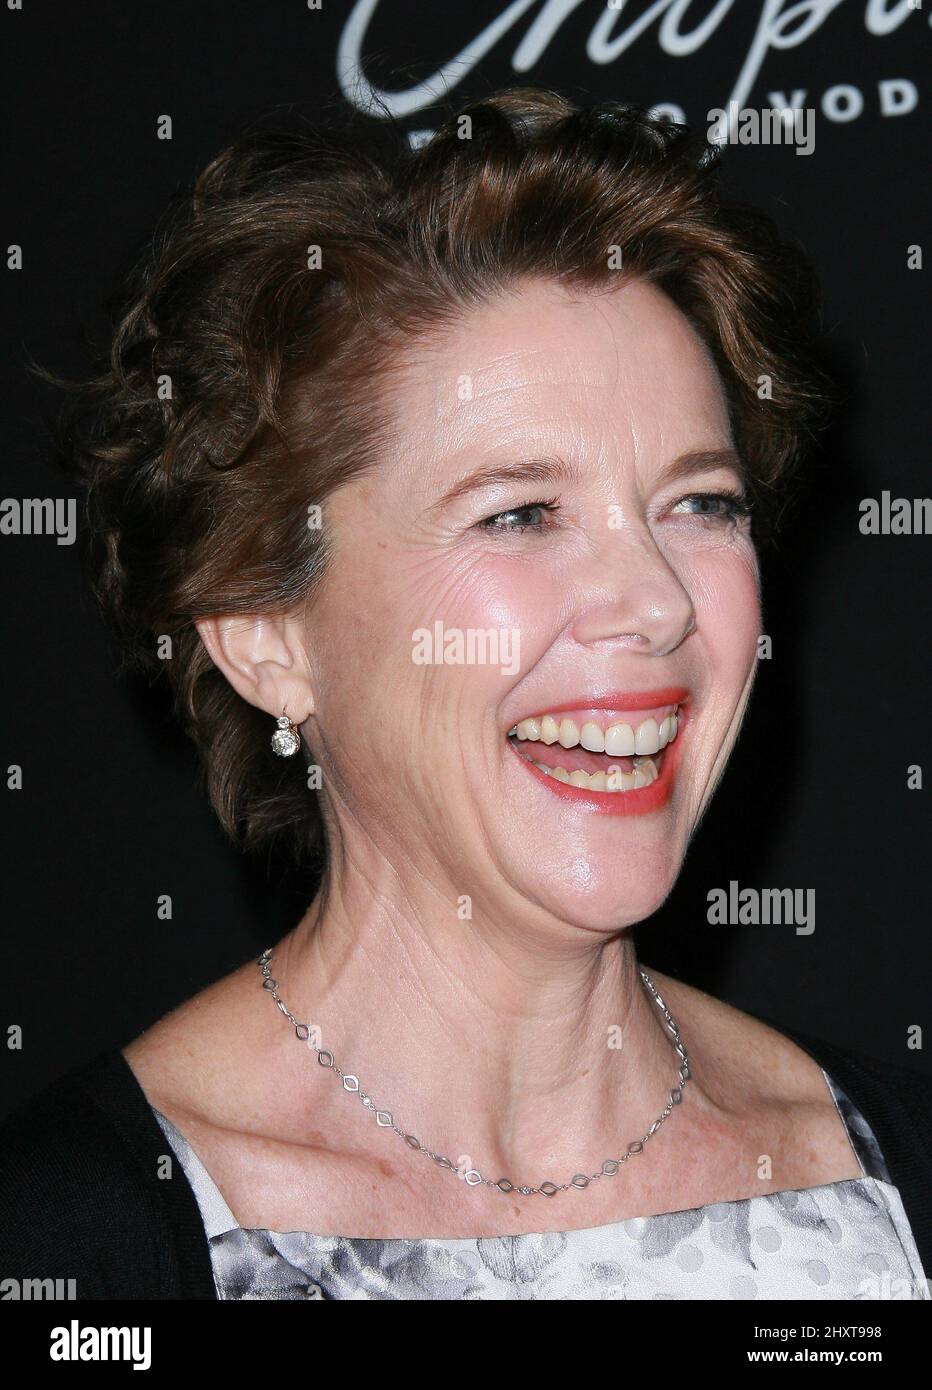 Annette Bening is honored with the American Riviera Award at the 2011 Santa Barbara International Film Festival held at the Arlington Theater in Santa Barbara, CA. Stock Photo